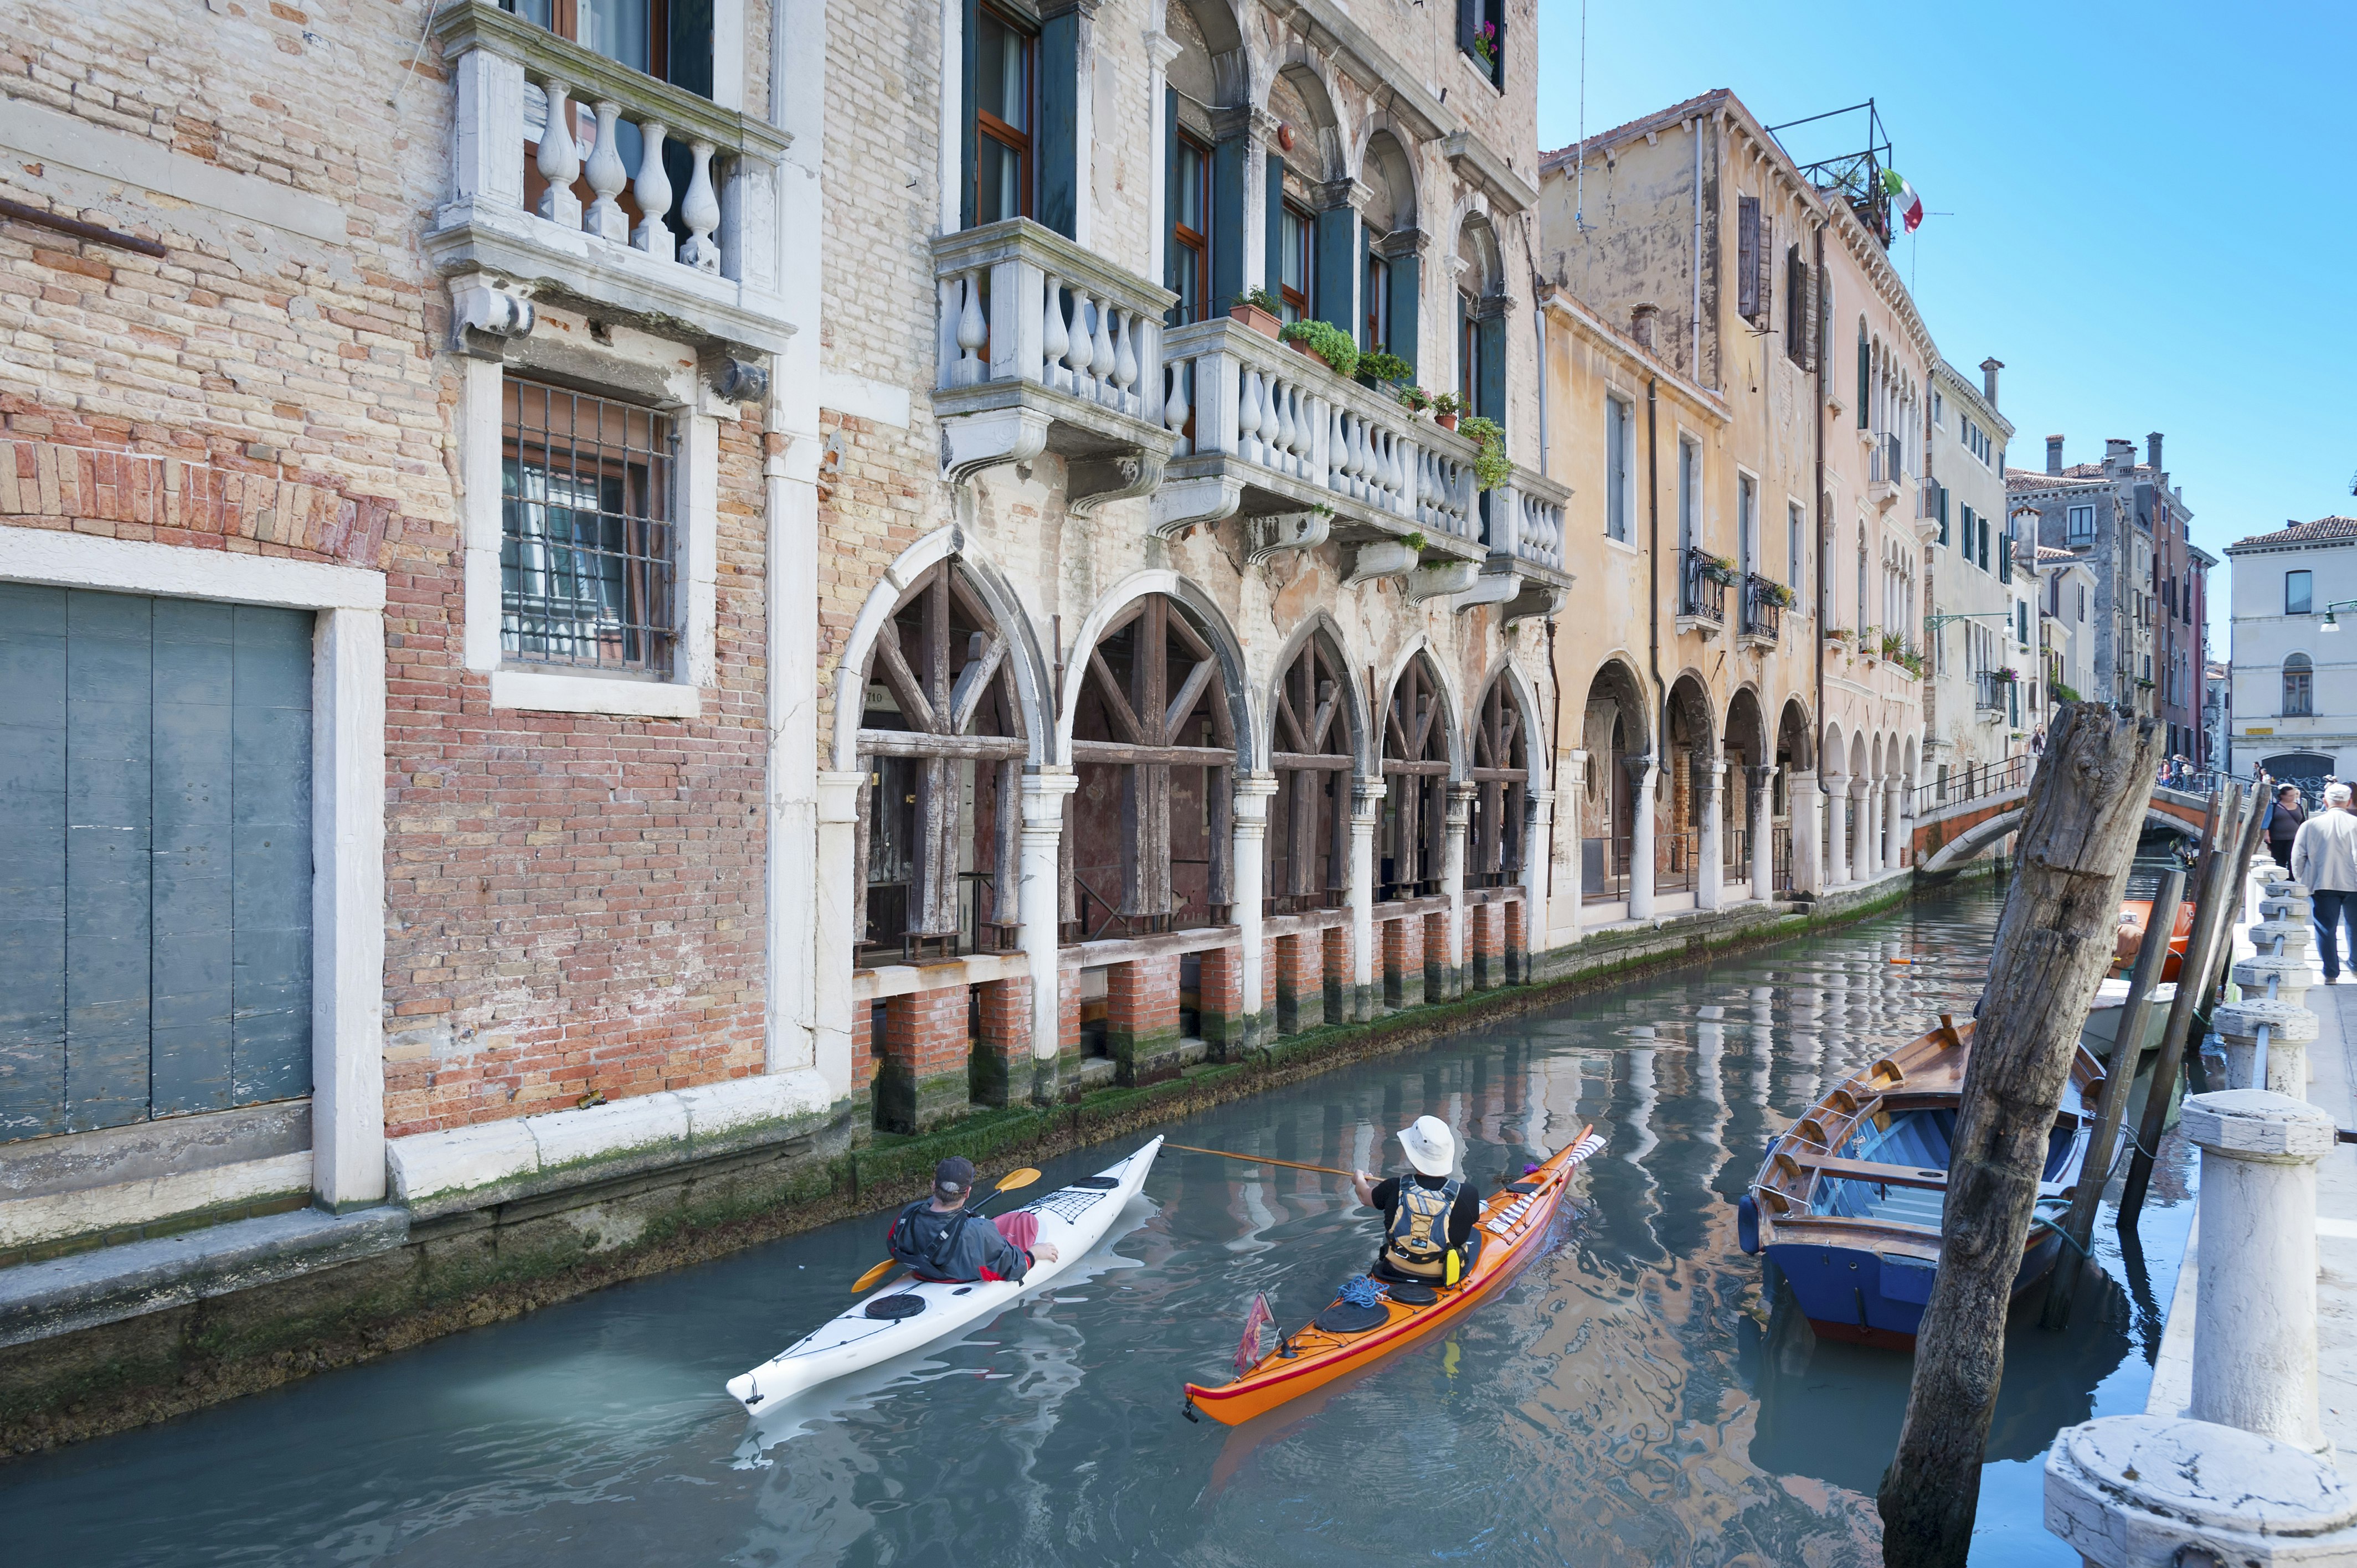 Two people steer their kayaks along a canal in Certosa, Venice